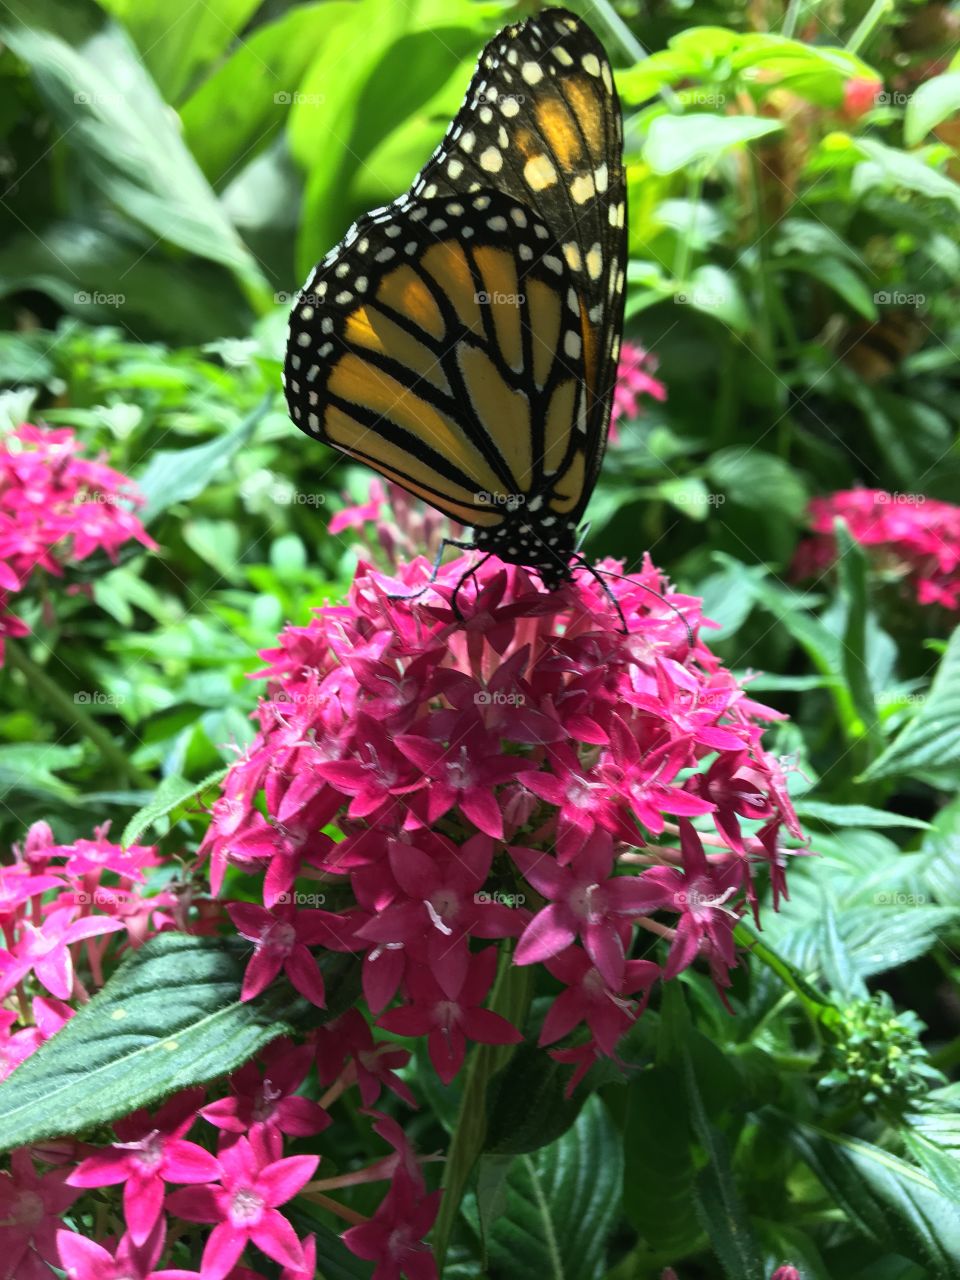 A delicate monarch butterfly sits on top of a bunch of bright pink flowers. A colorful, fun picture of summer or spring time.